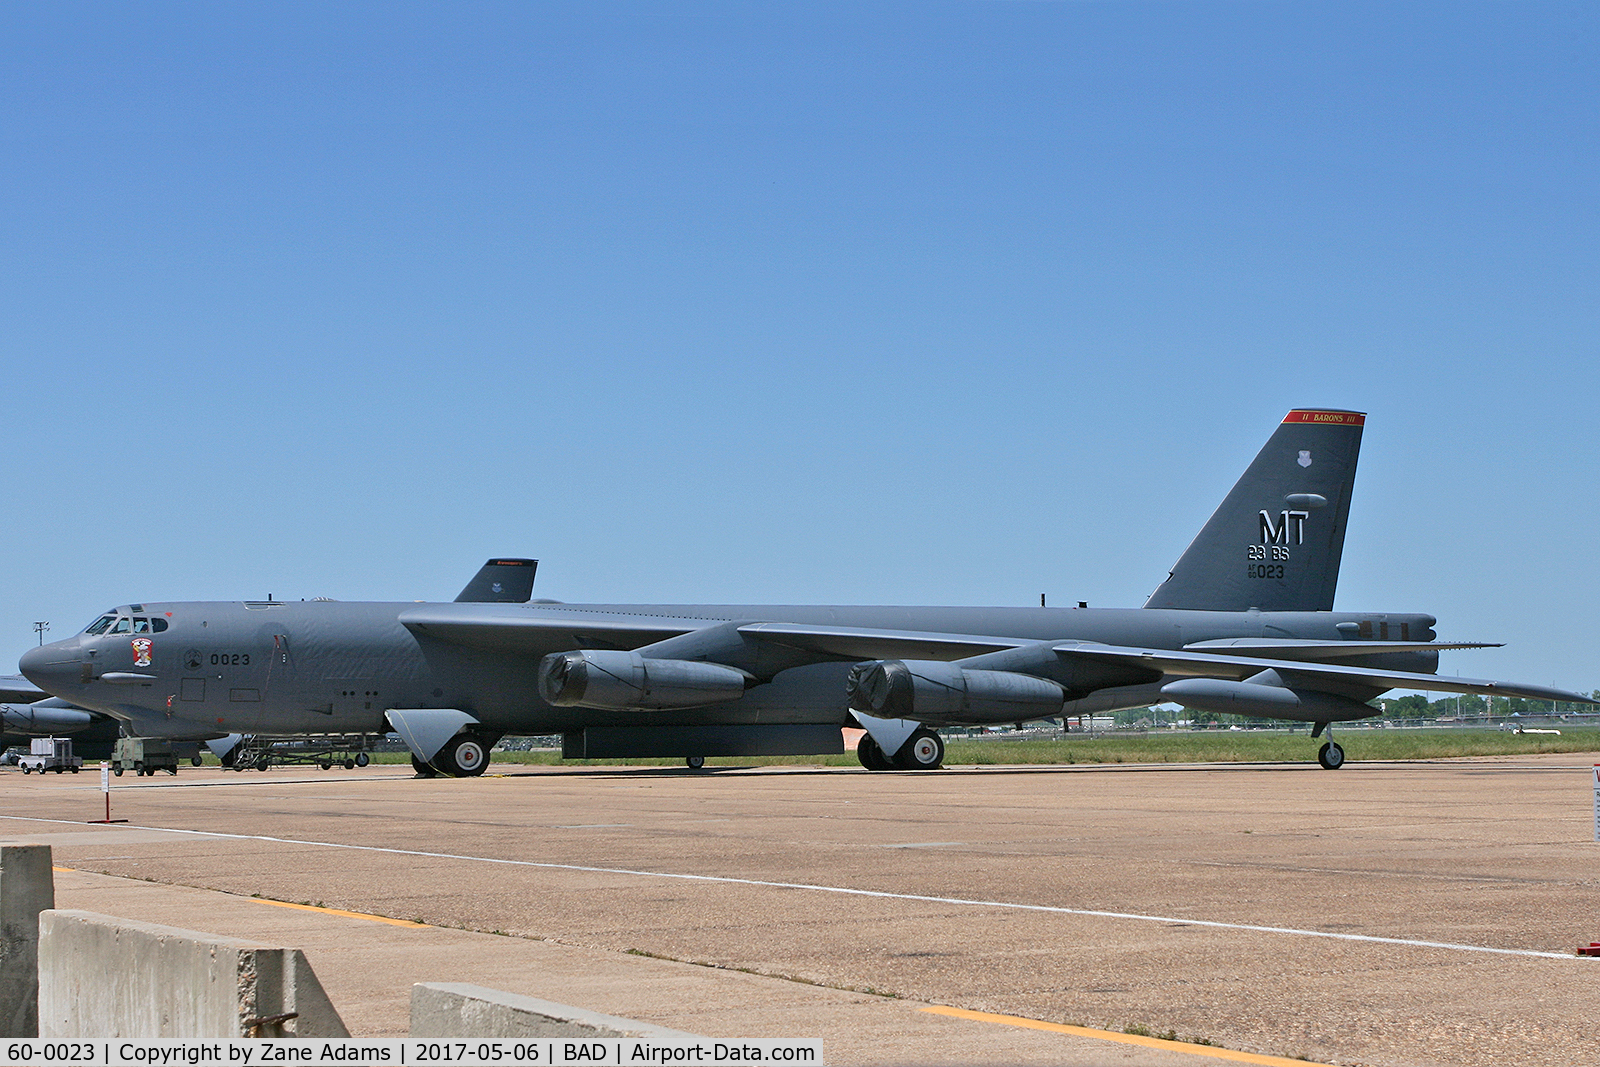 60-0023, 1960 Boeing B-52H Stratofortress C/N 464388, At the 2017 Barksdale AFB Airshow